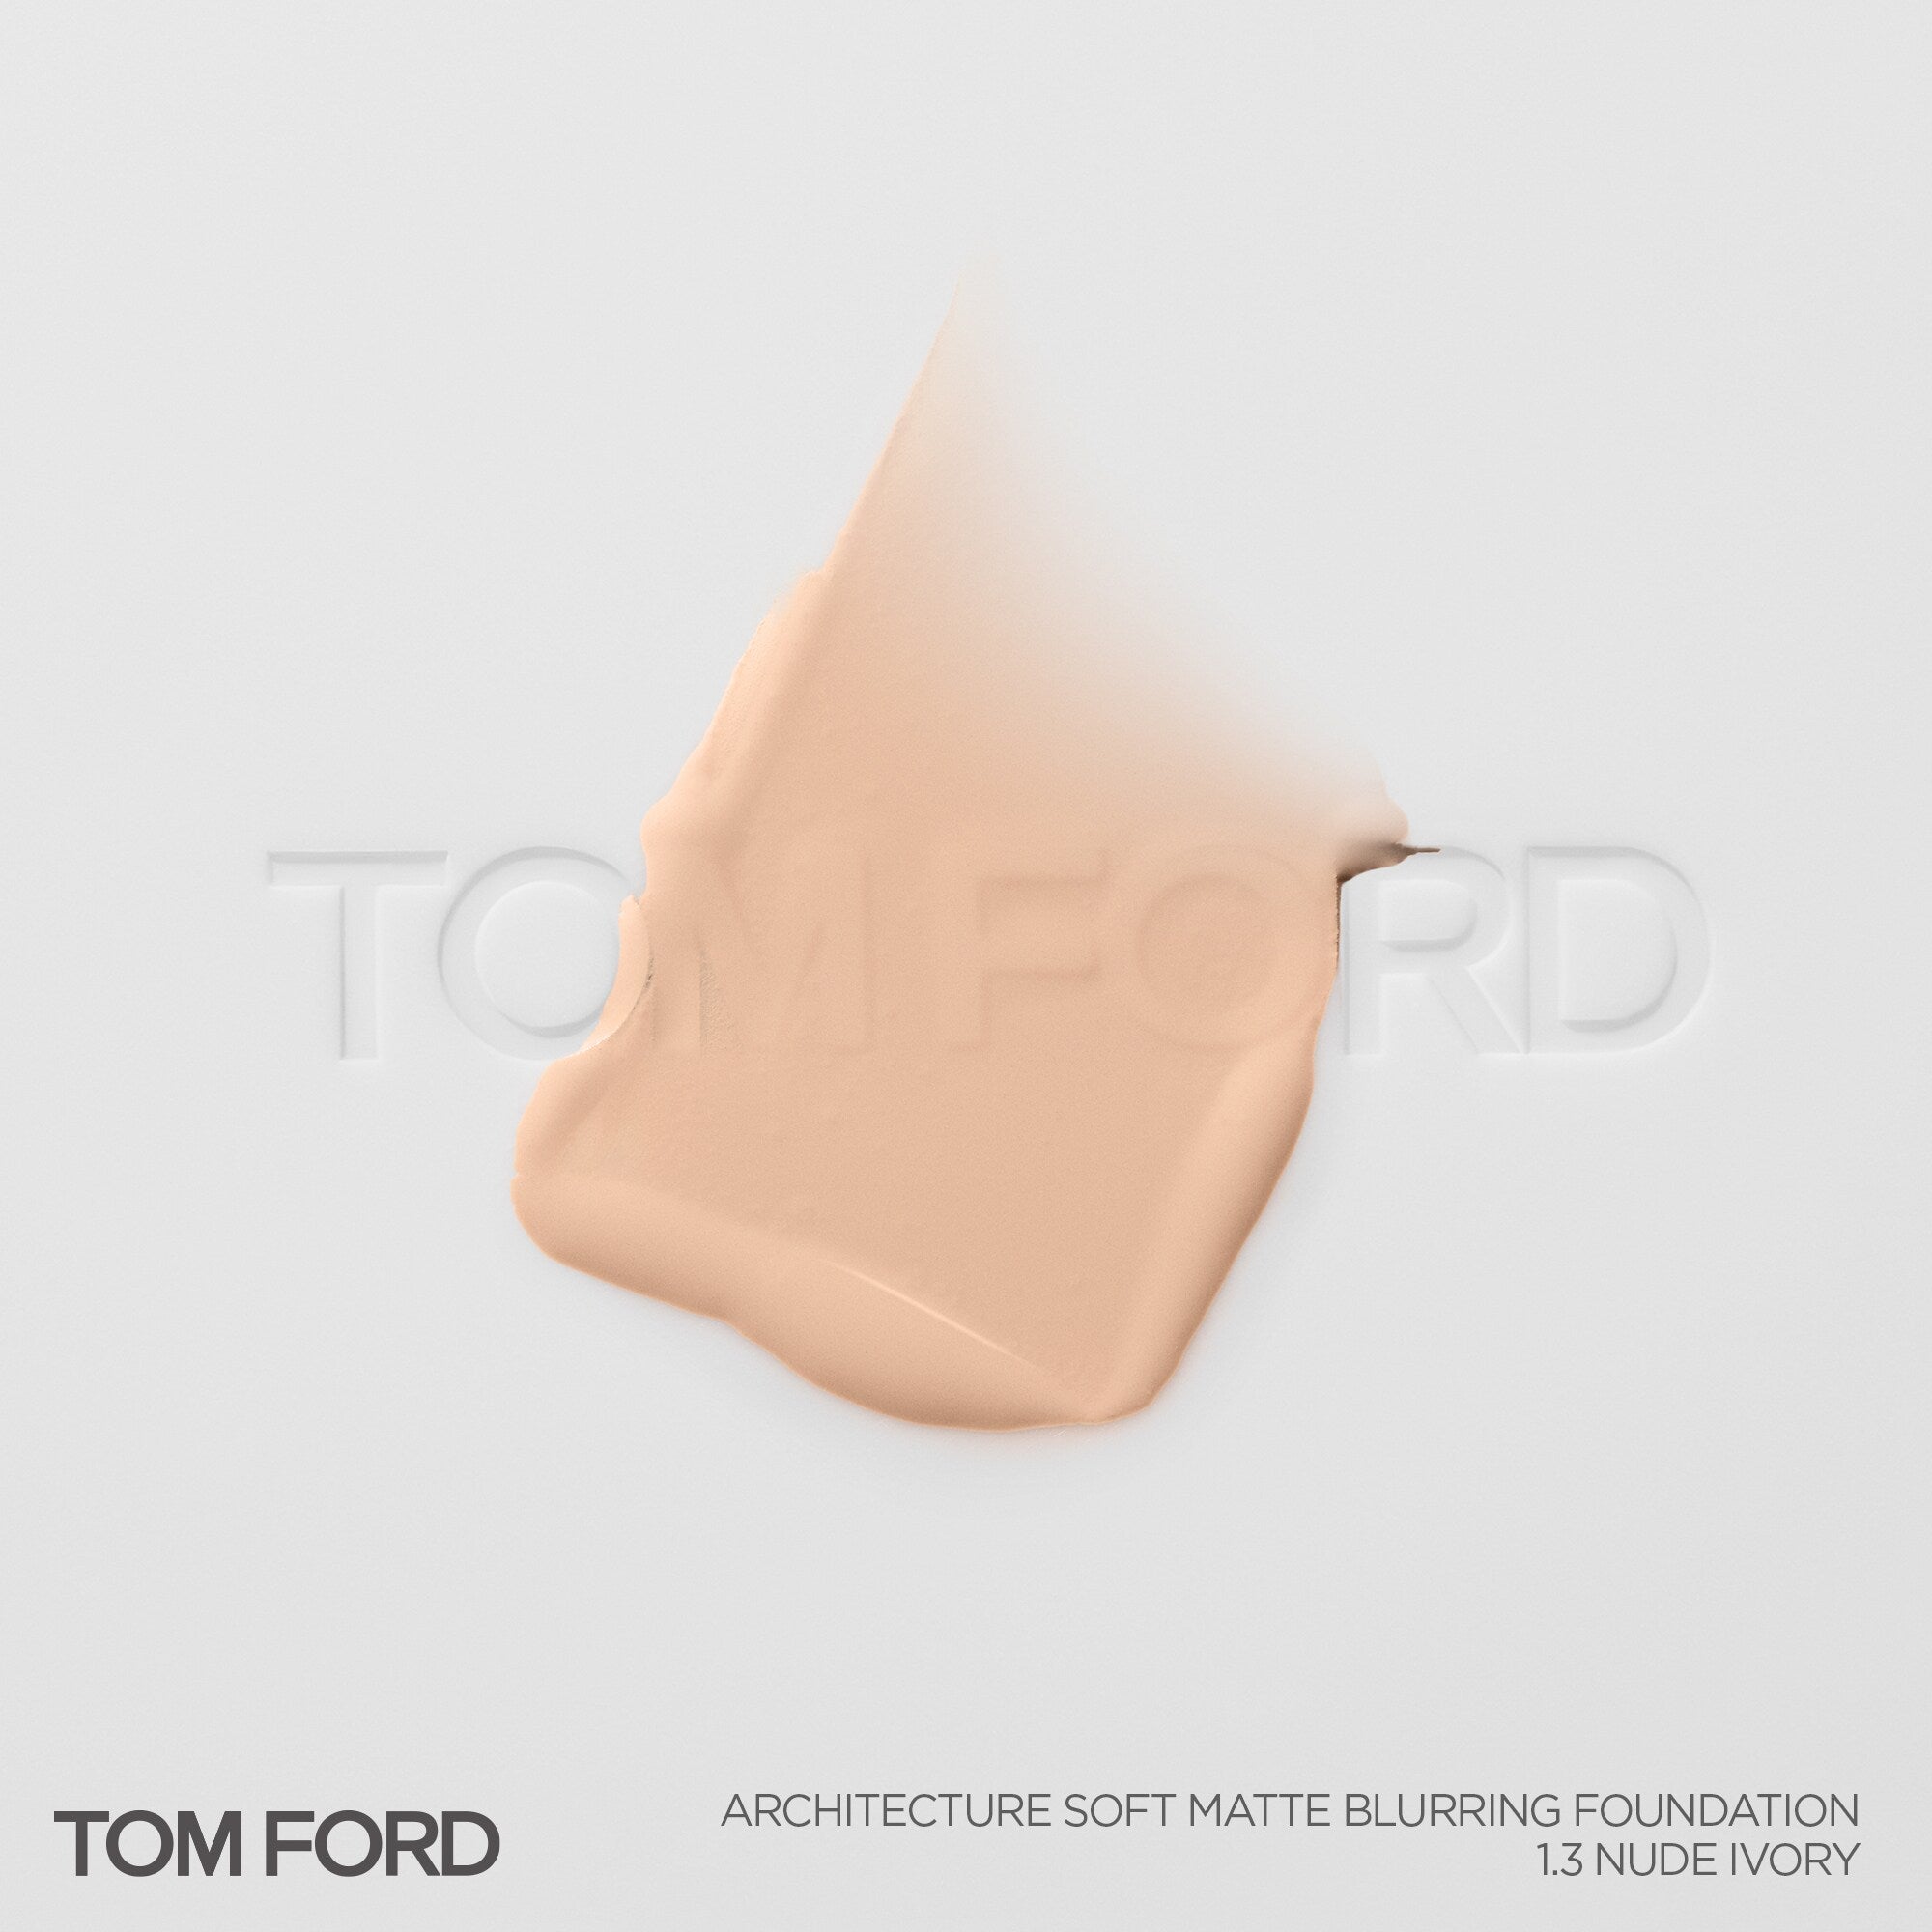 Kem Nền TOM FORD Architecture Soft Matte Foundation #1.3 Nude Ivory